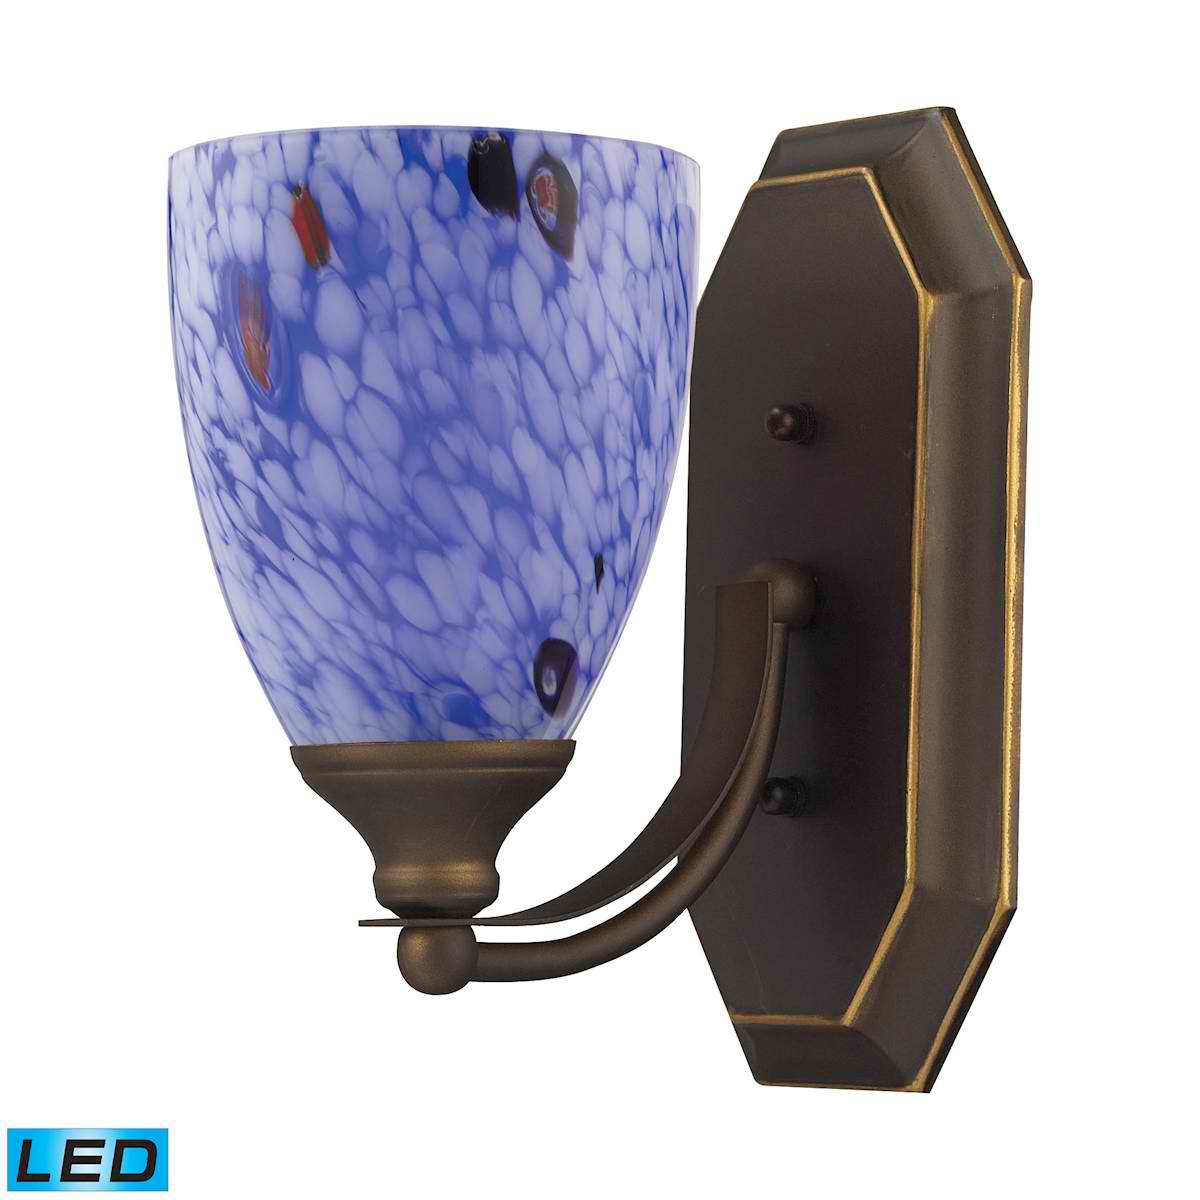 1 Light Vanity in Aged Bronze and Starburst Blue Glass - LED Offering Up To 800 Lumens (60 Watt Equivalent)